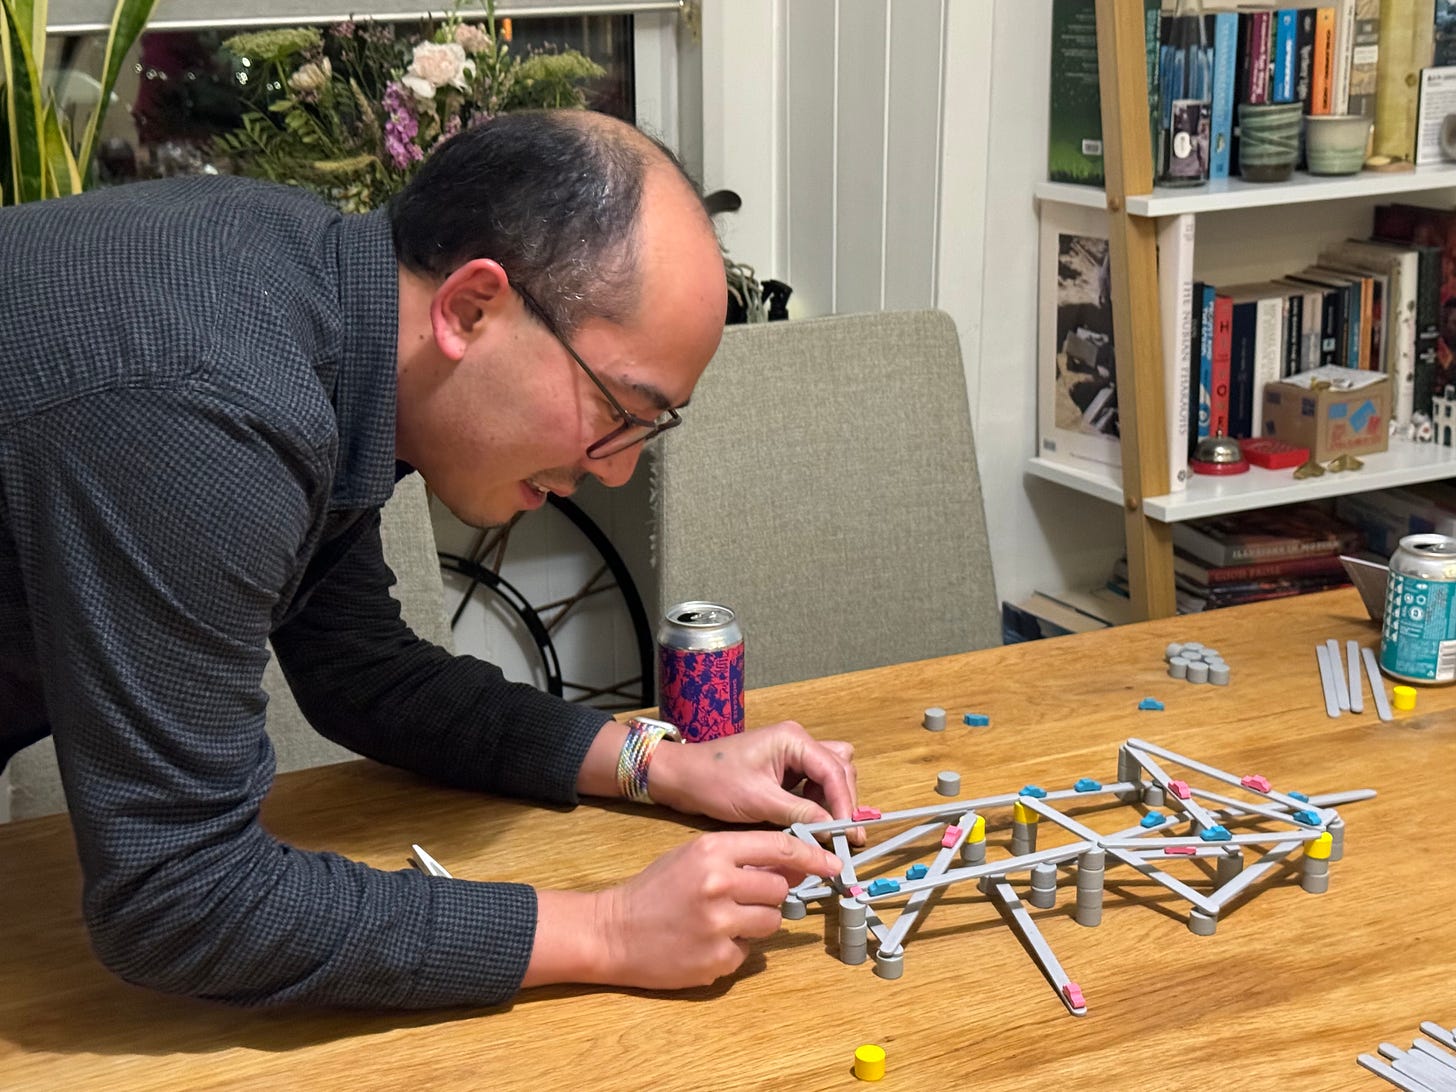 Adrian adjusting the position of a miniature highway on a board game